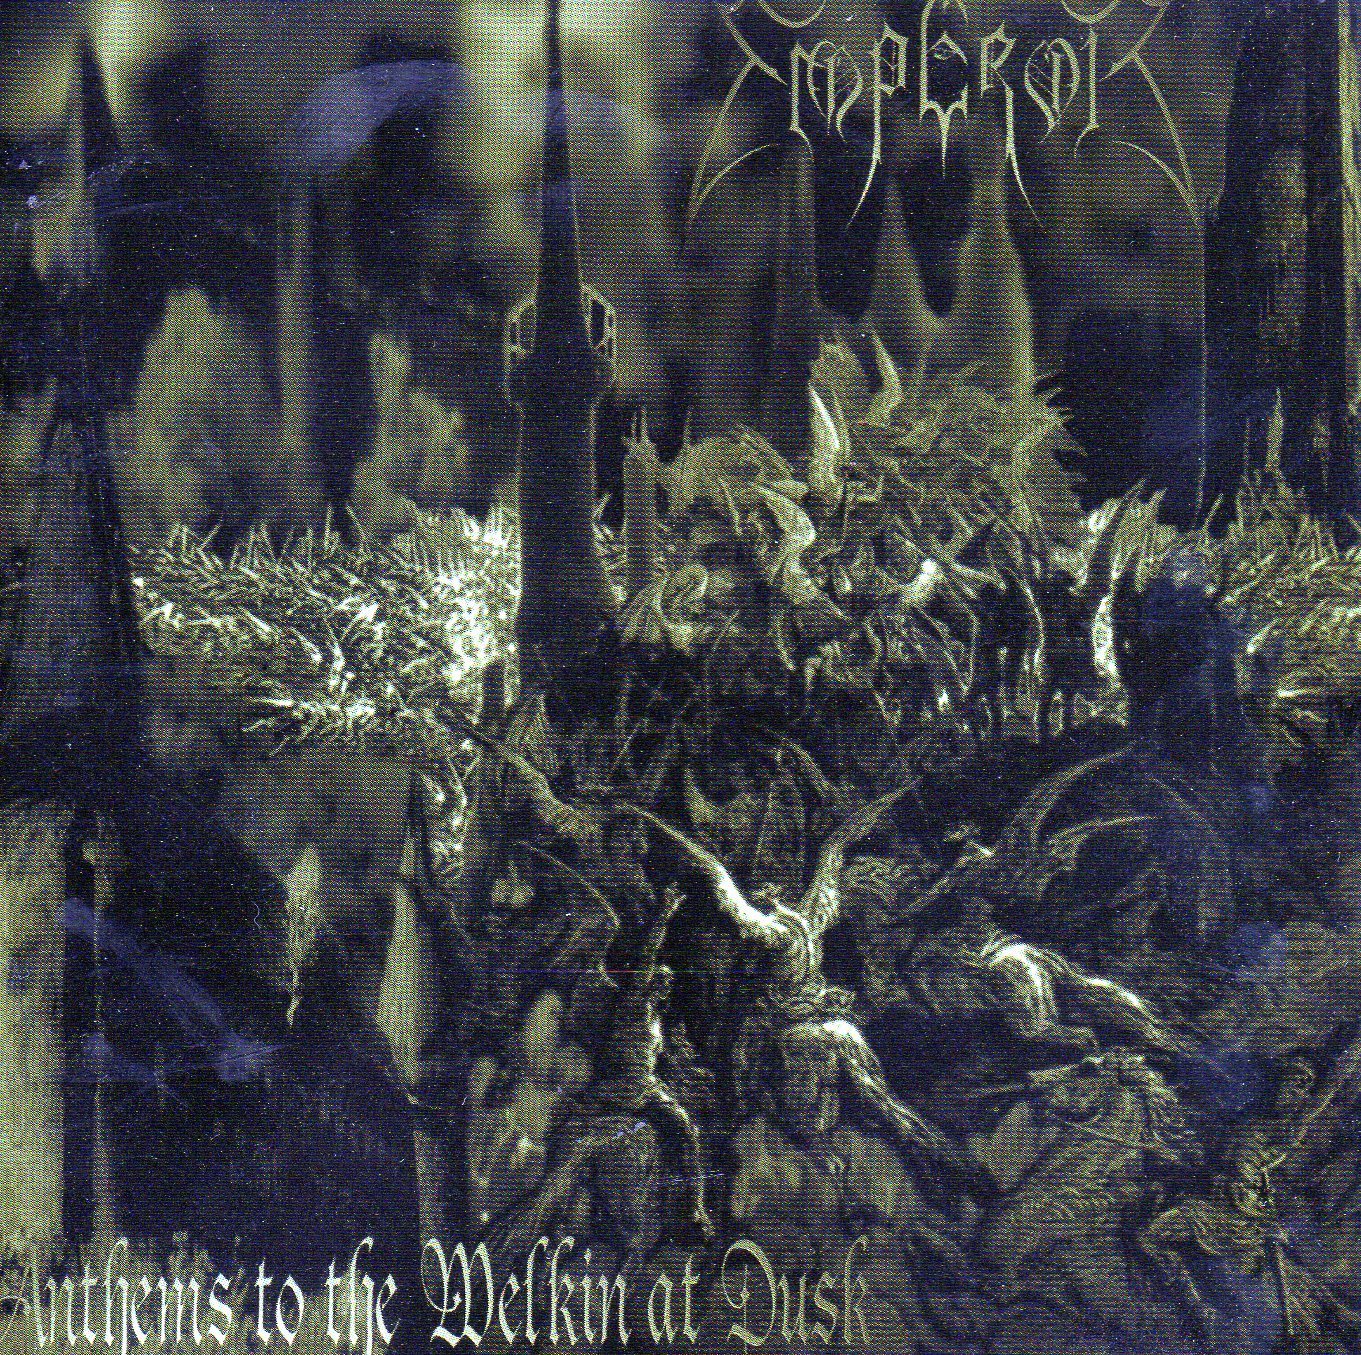 Voices of the void череп. Emperor Anthems to the Welkin at Dusk. Anthems to the Welkin at Dusk. Voices of the Void.